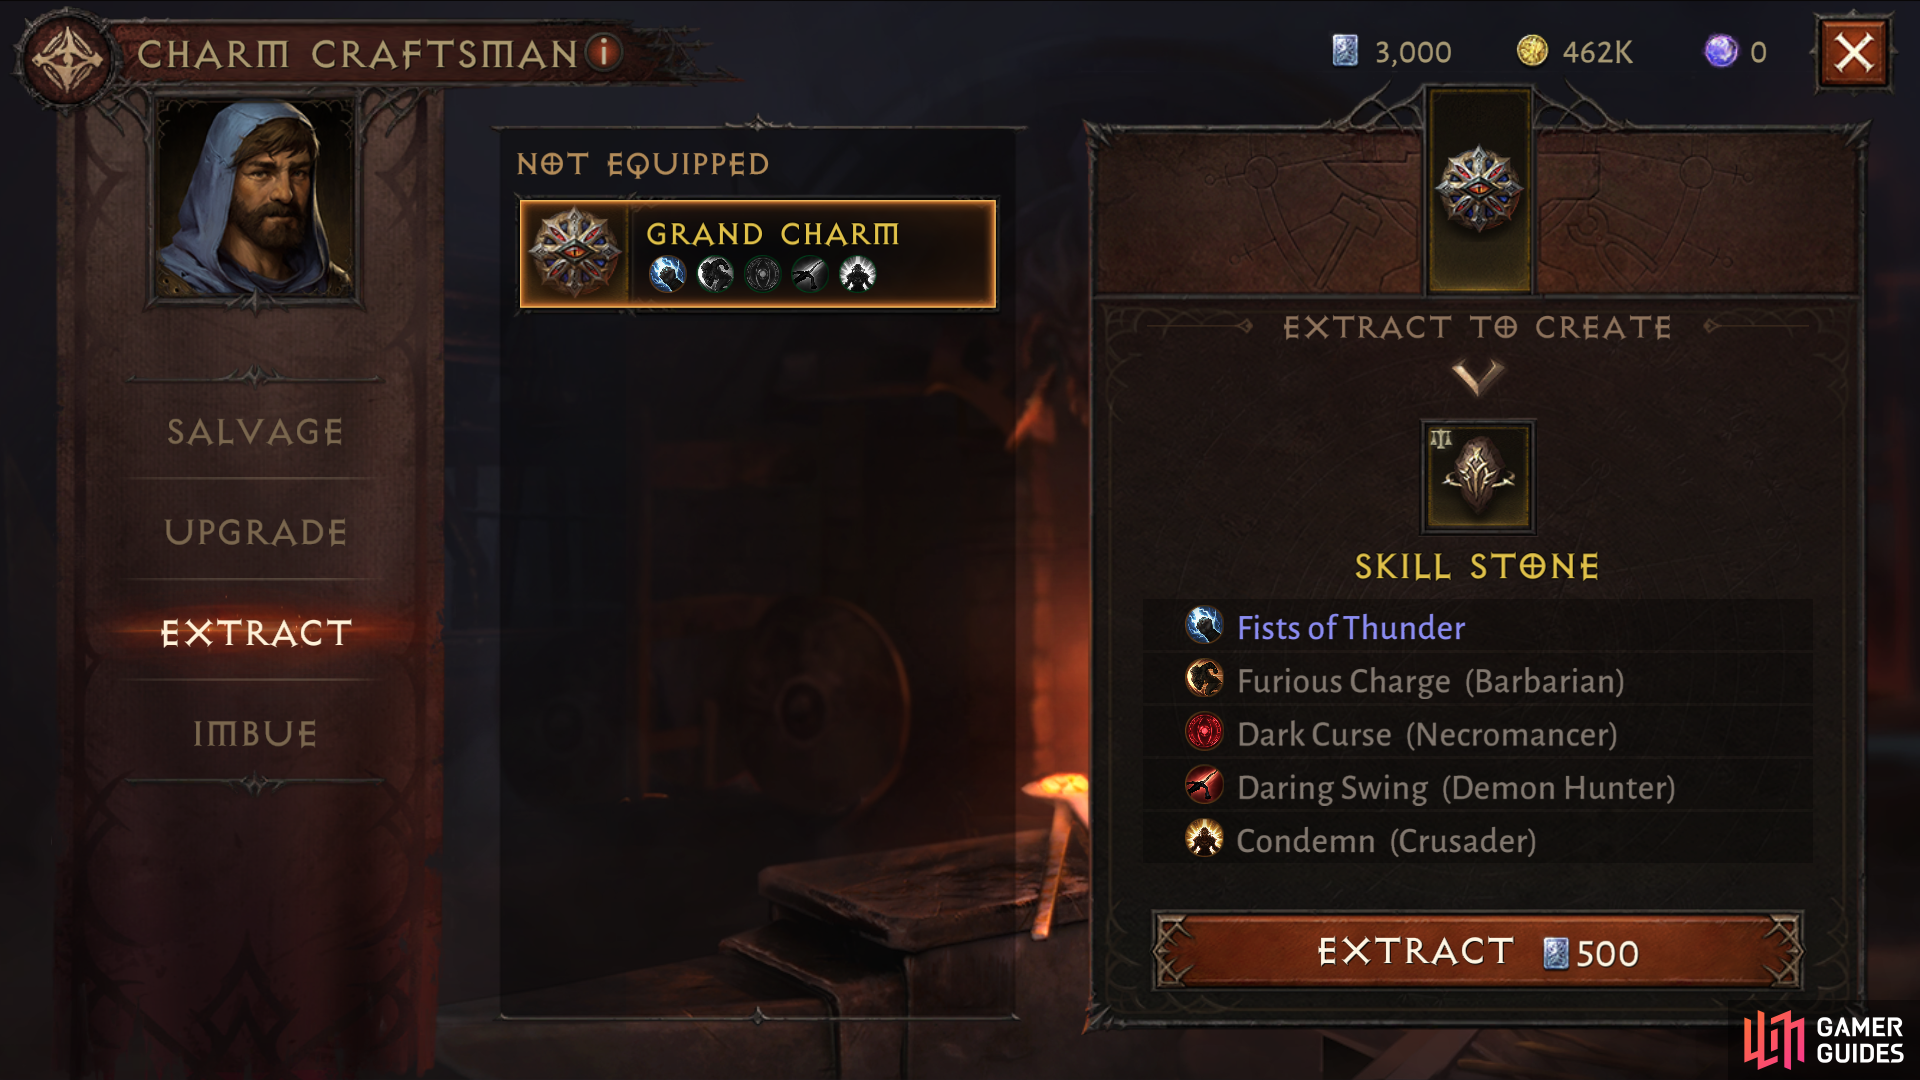 Once maxed out, you can "extract" a Charm, turning it into a Skill Stone.